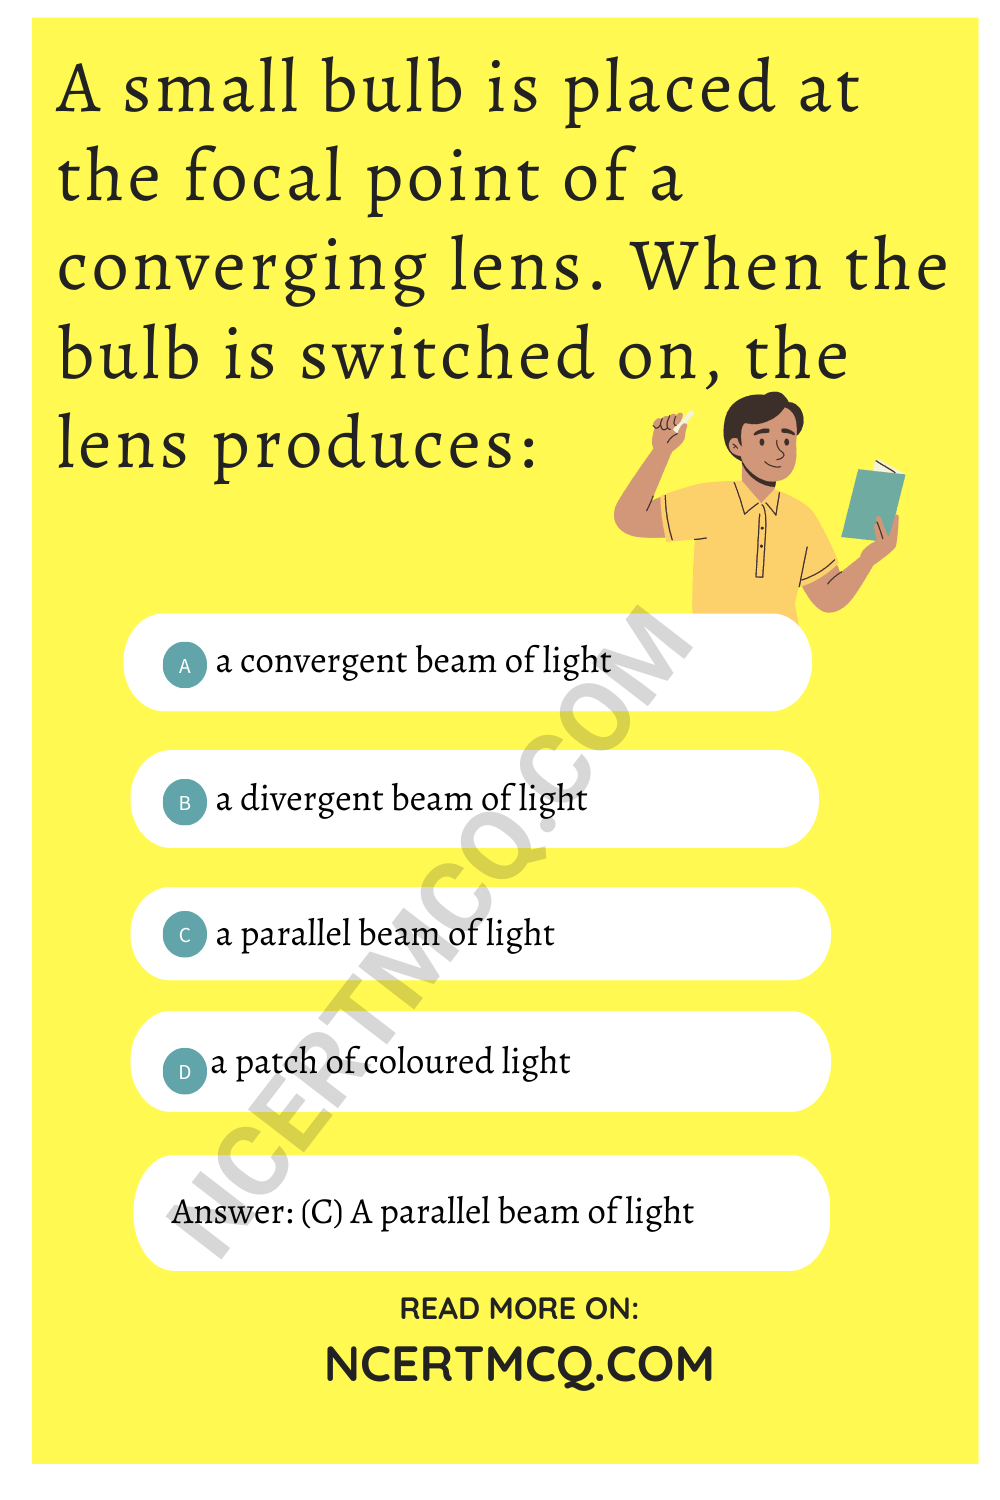 A small bulb is placed at the focal point of a converging lens. When the bulb is switched on, the lens produces: